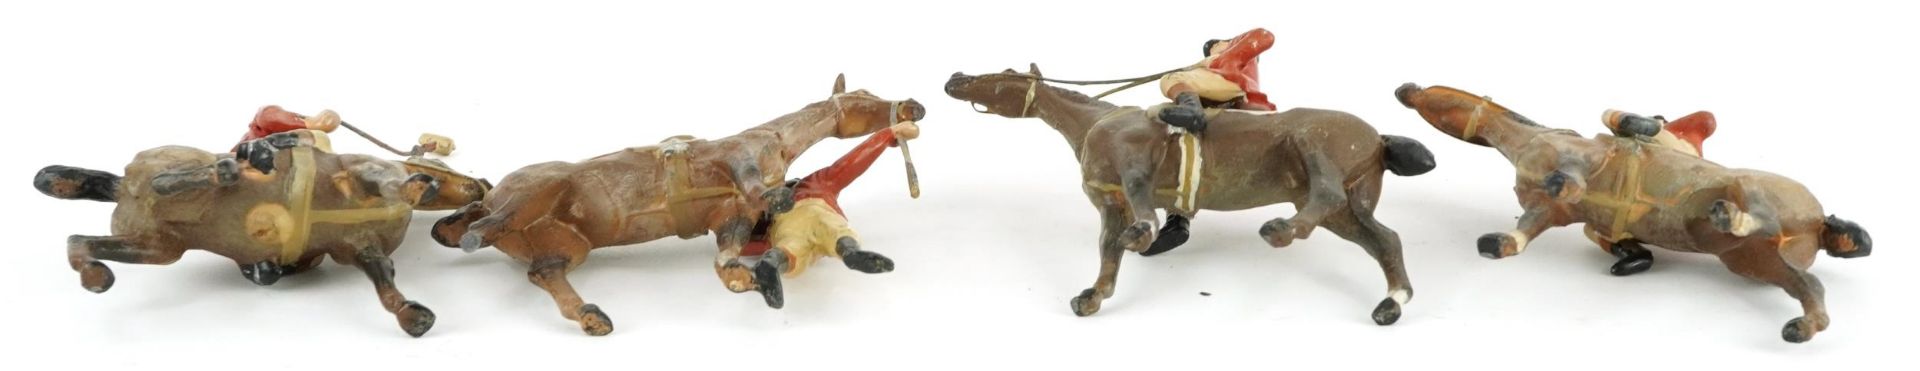 Four Heyde 56mm jockeys and horses including Polo Player and Huntsman : For further information on - Image 3 of 3